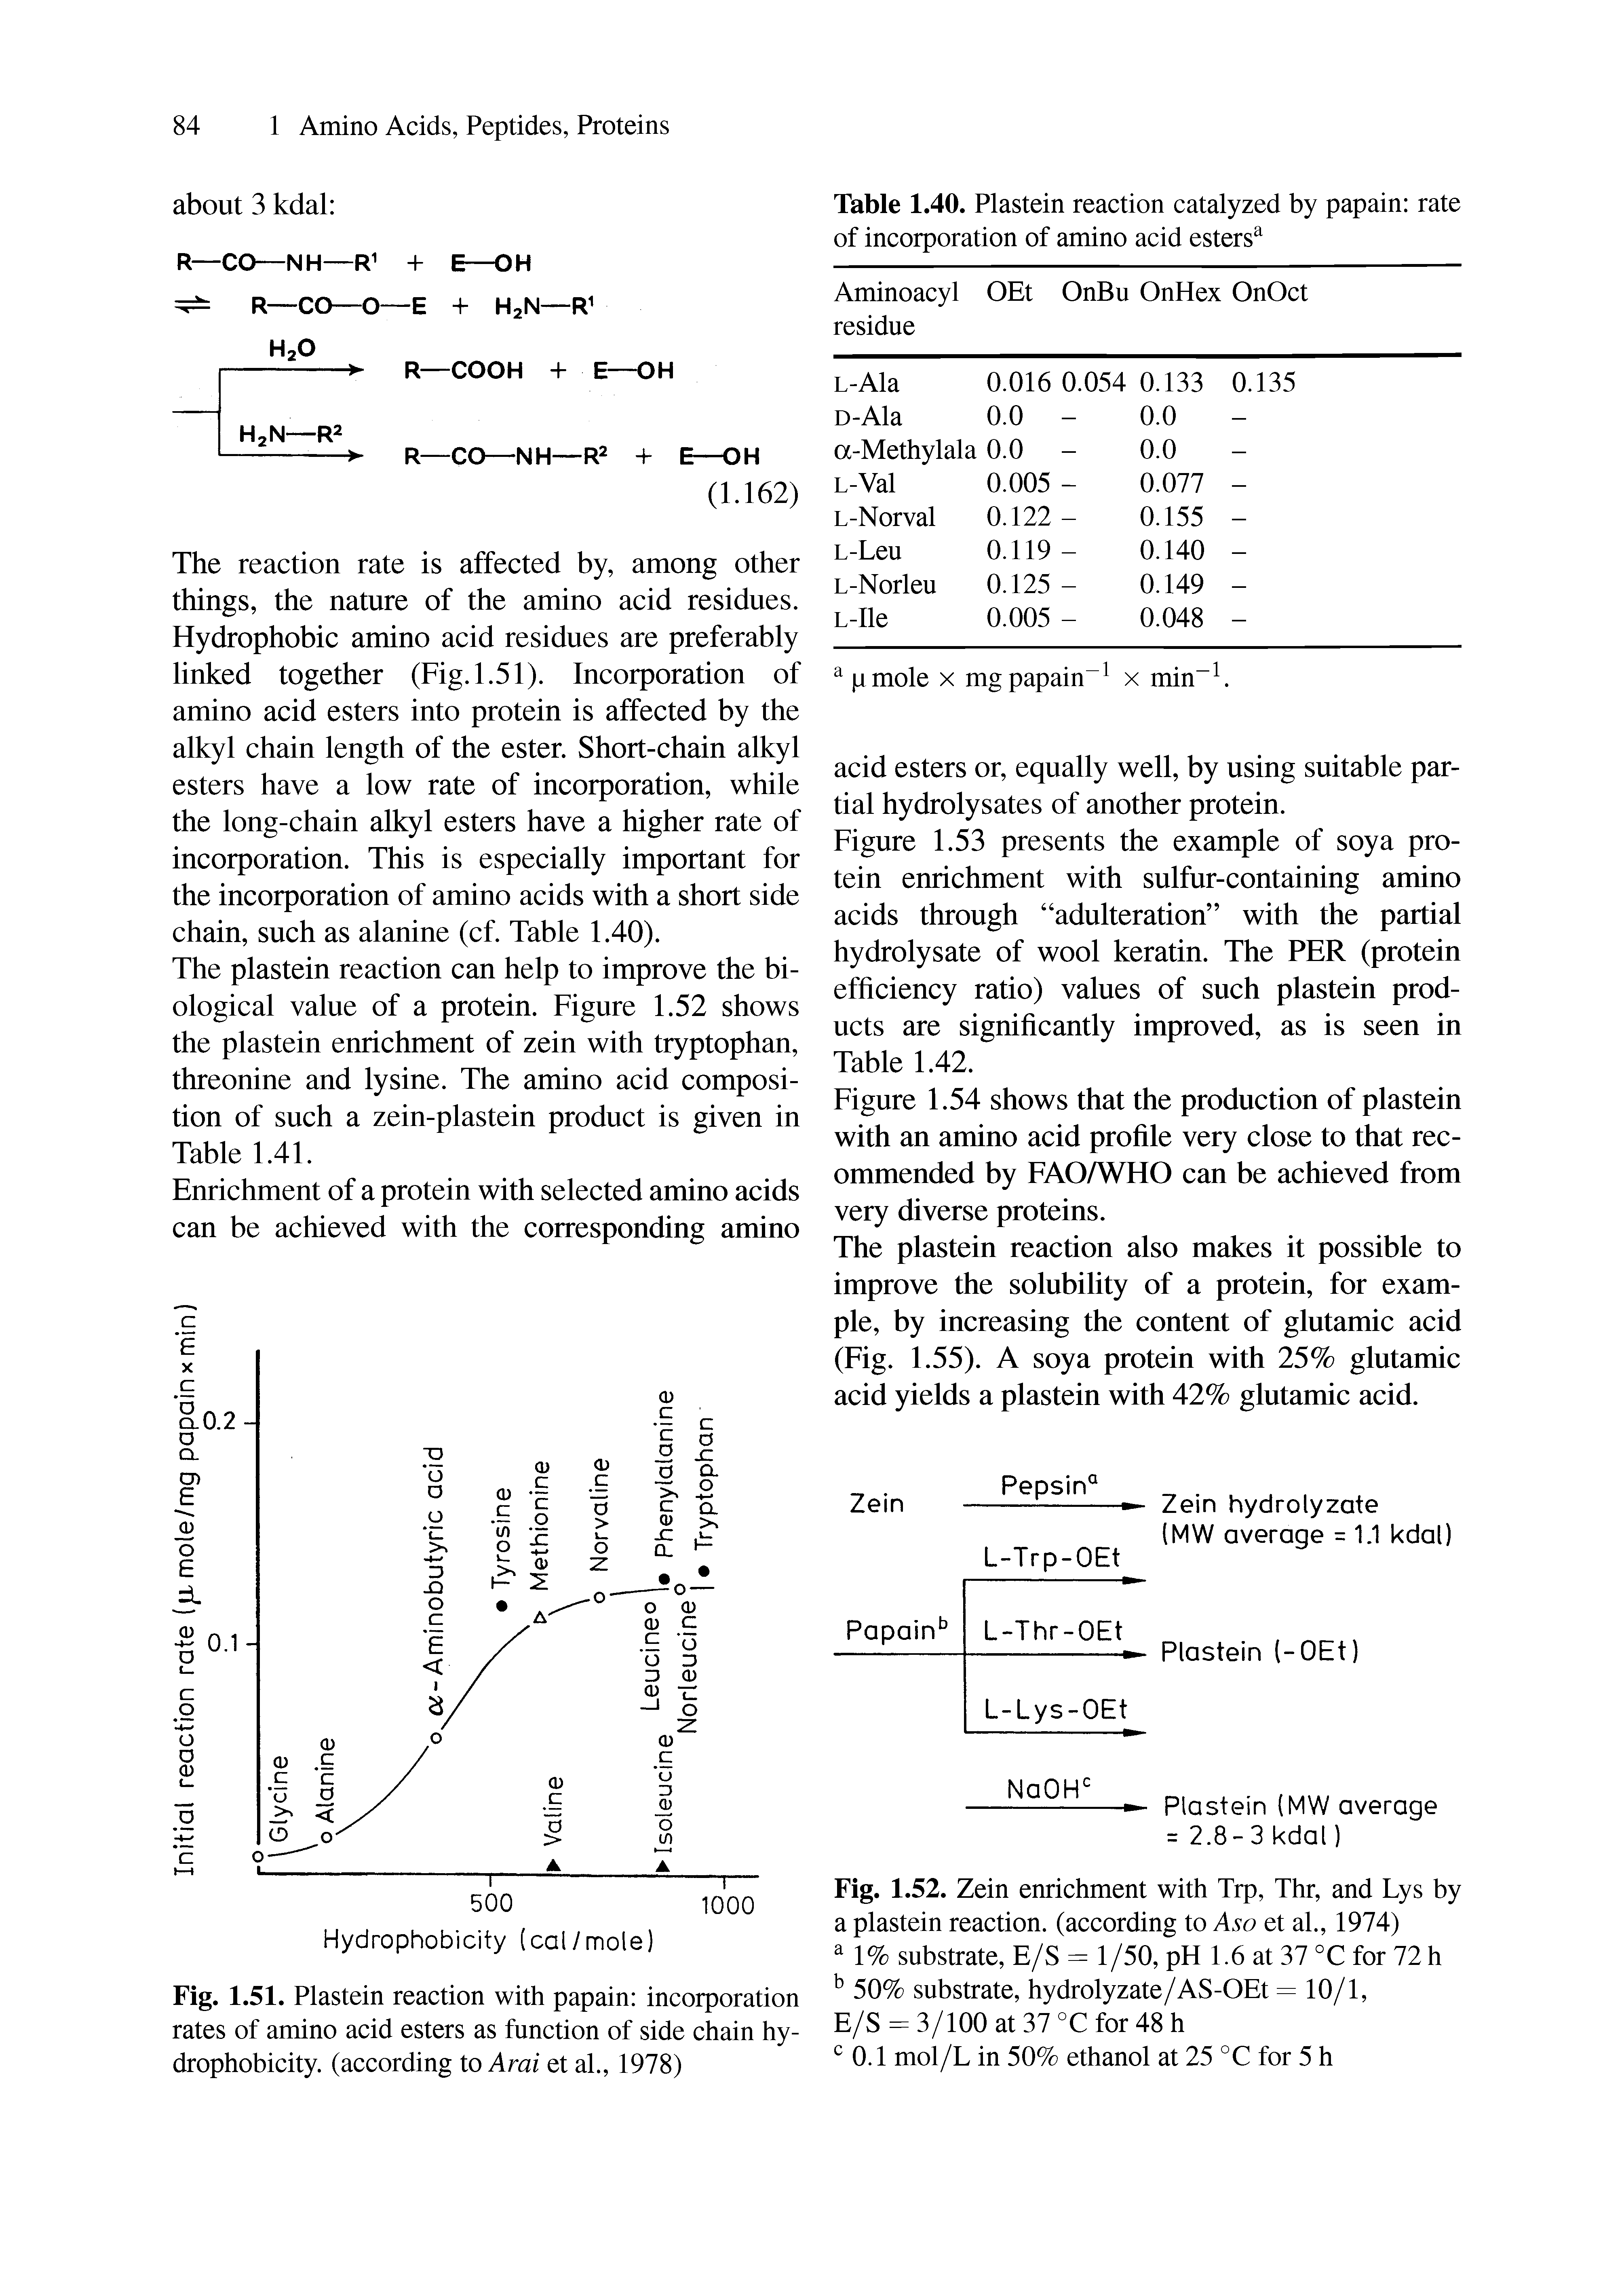 Fig. 1.51. Plastein reaction with papain incorporation rates of amino acid esters as function of side chain hydrophobicity. (according to Arai et al., 1978)...